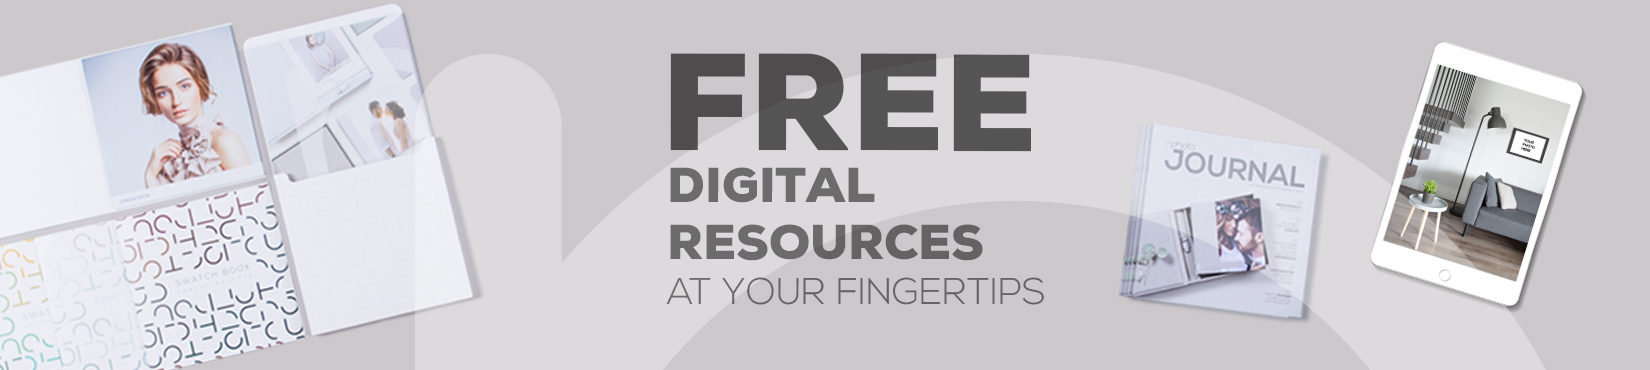 Free Digital Resources for Photographers